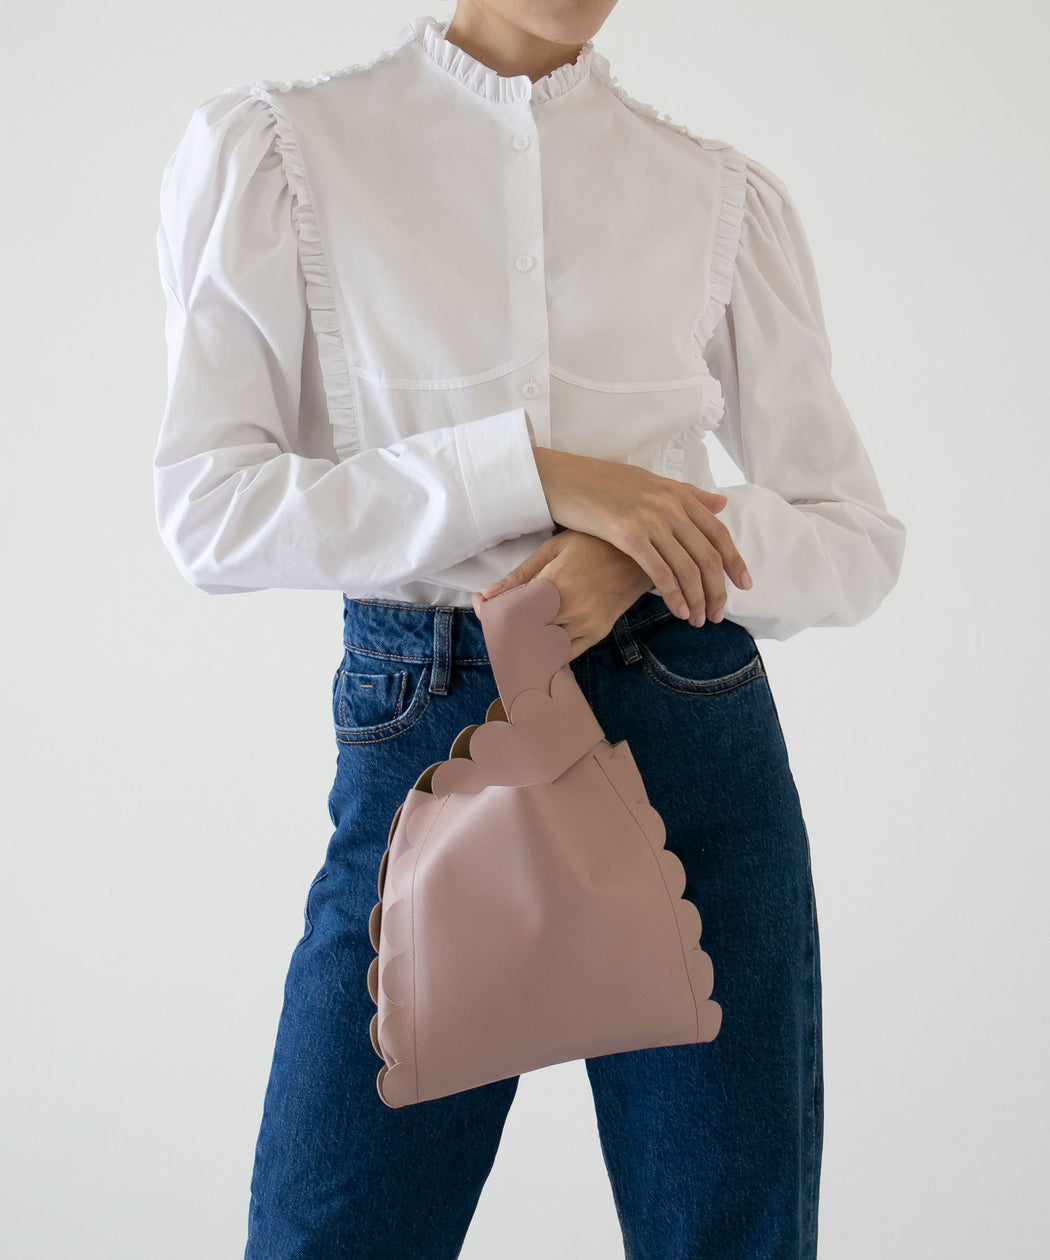 Scalloped leather shopping bag